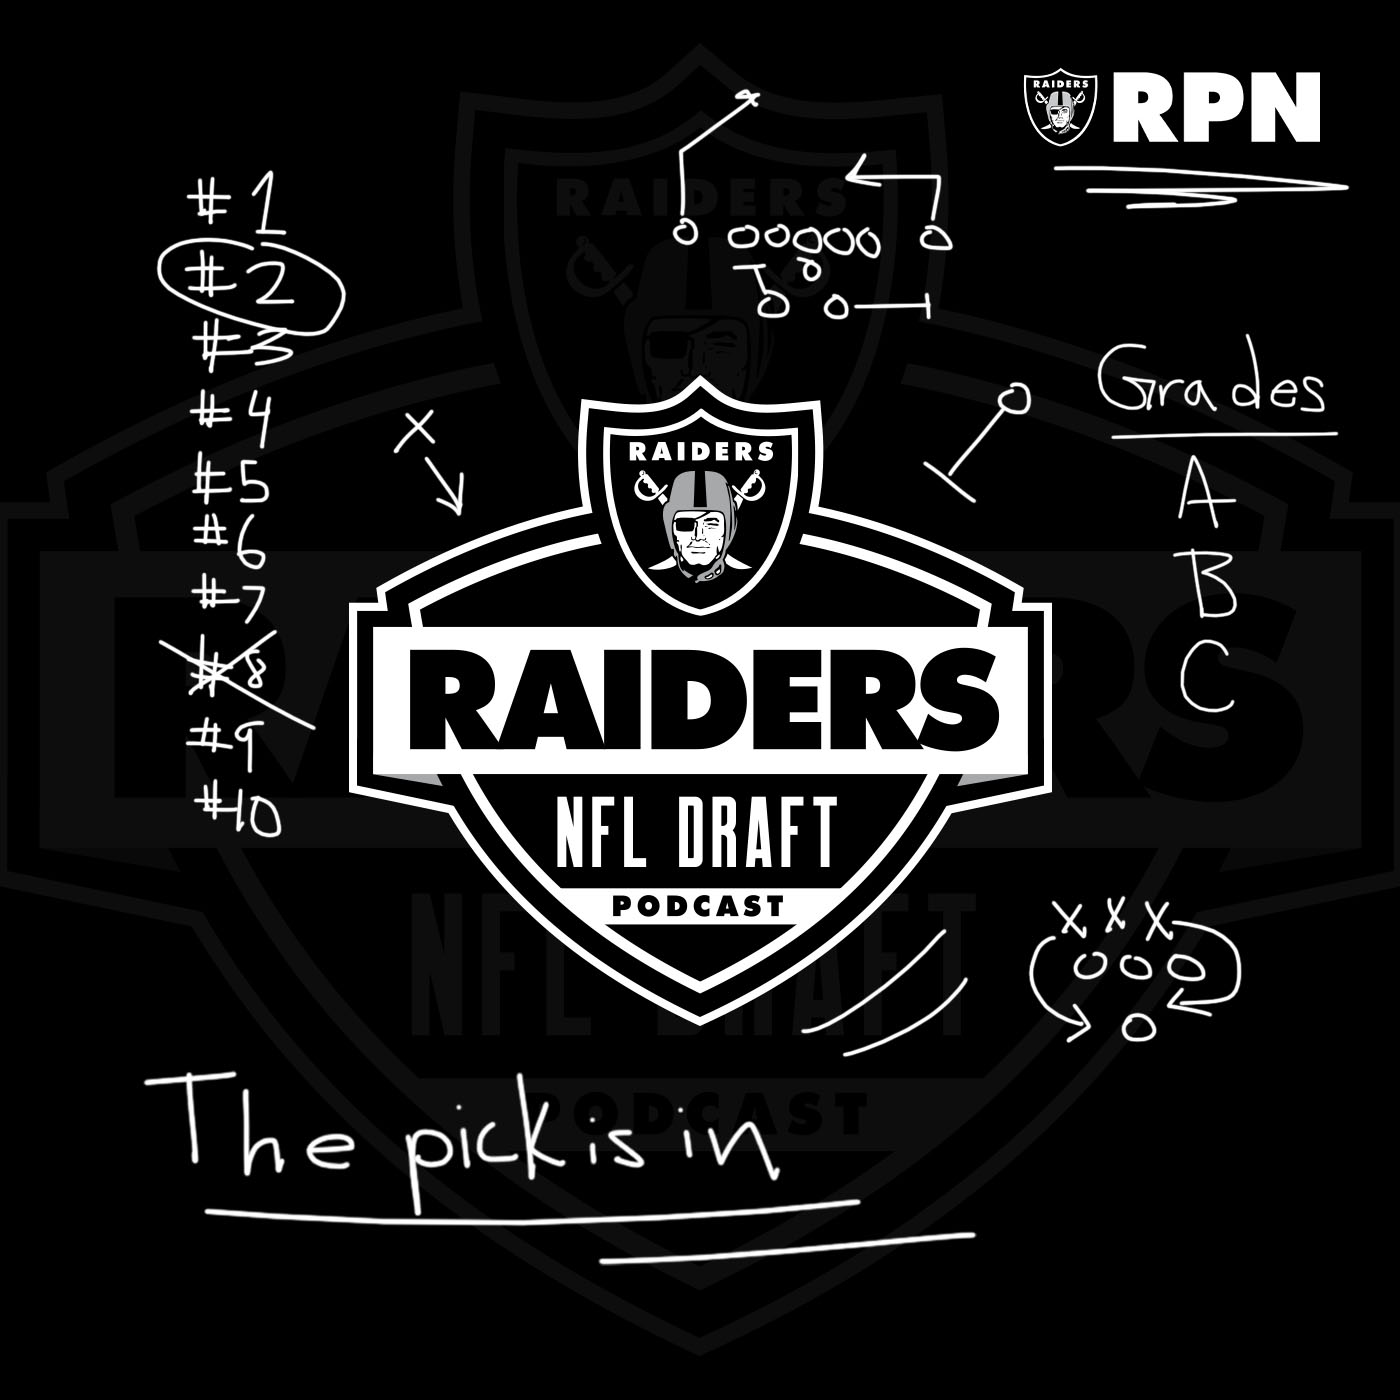 The Raiders NFL Draft Podcast